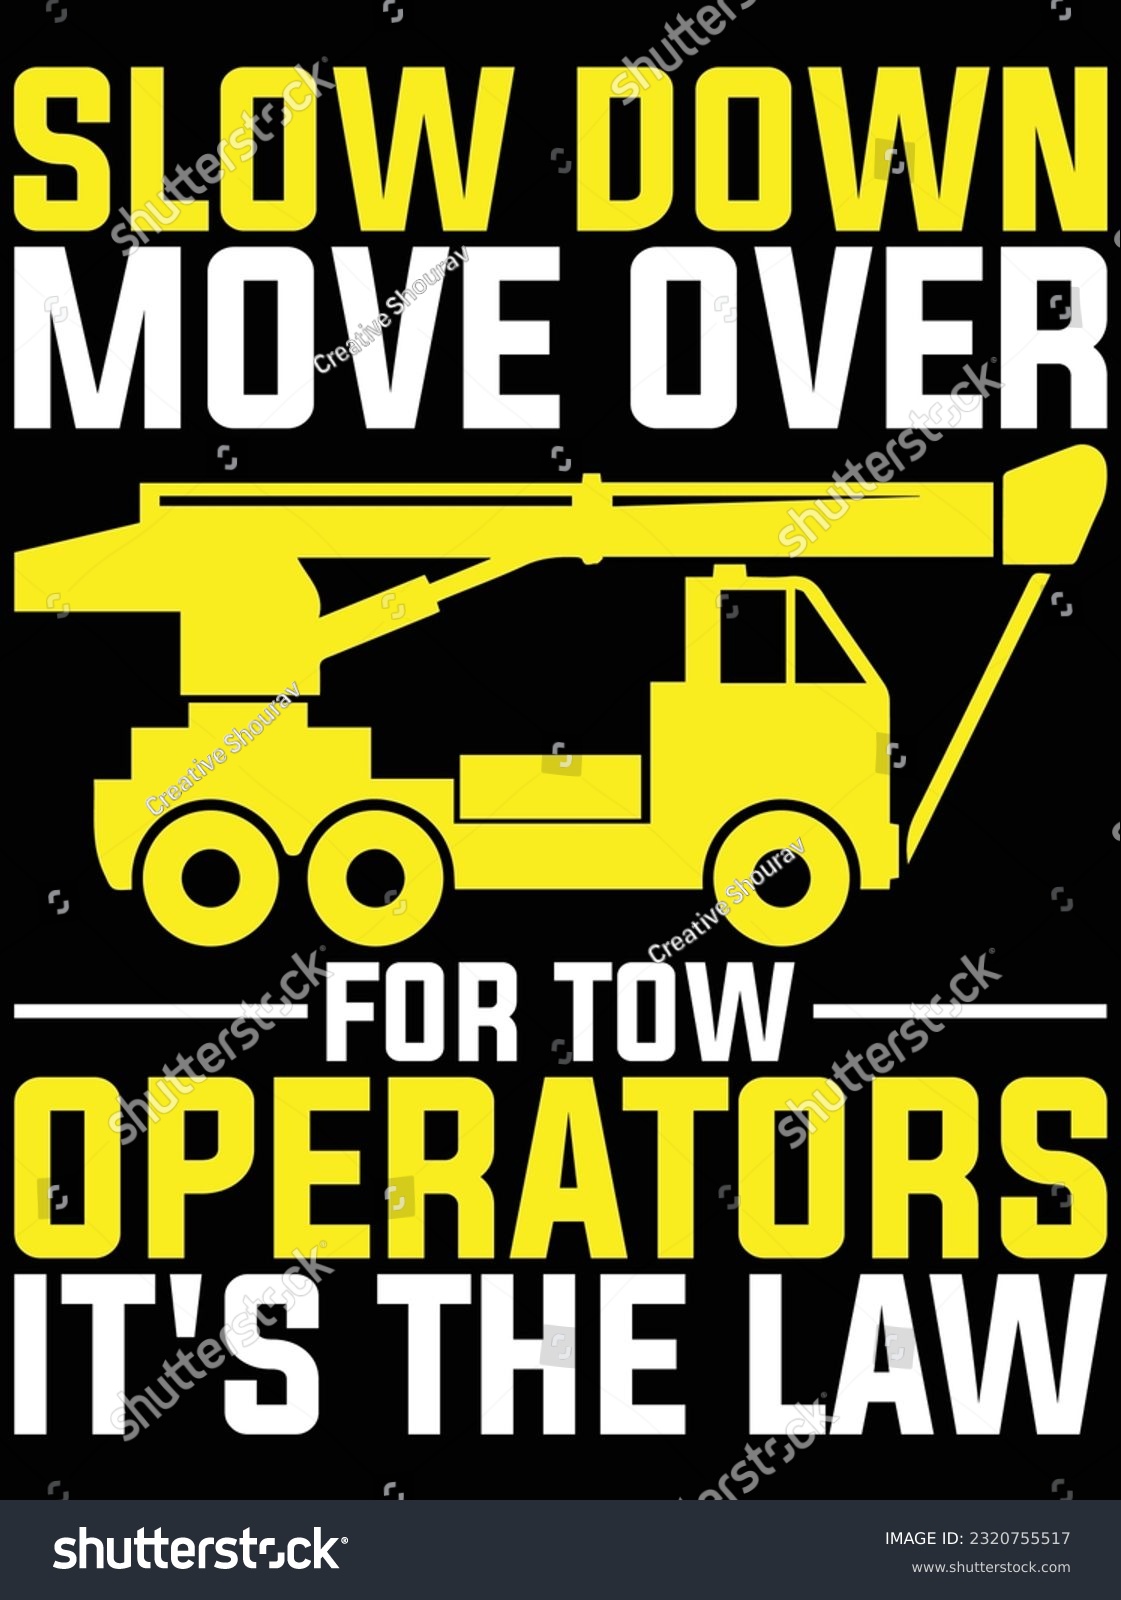 SVG of Slow down move over for tow it's operators vector art design, eps file. design file for t-shirt. SVG, EPS cuttable design file svg